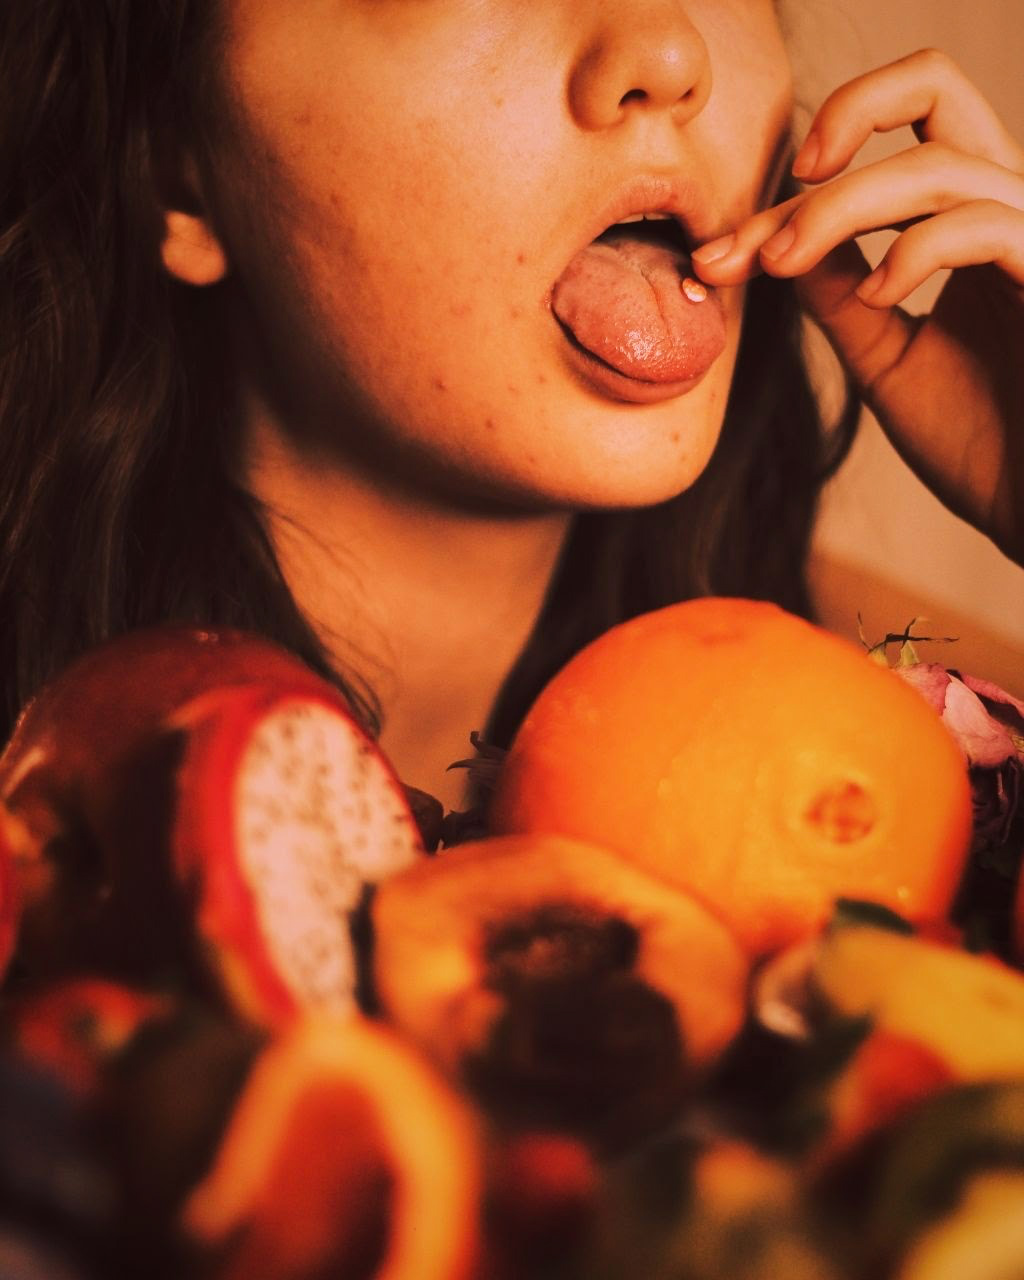 Image: A woman visible from nose to neck places a pill on her tongue. In the foreground, various fruit are strewn on a flat surface.